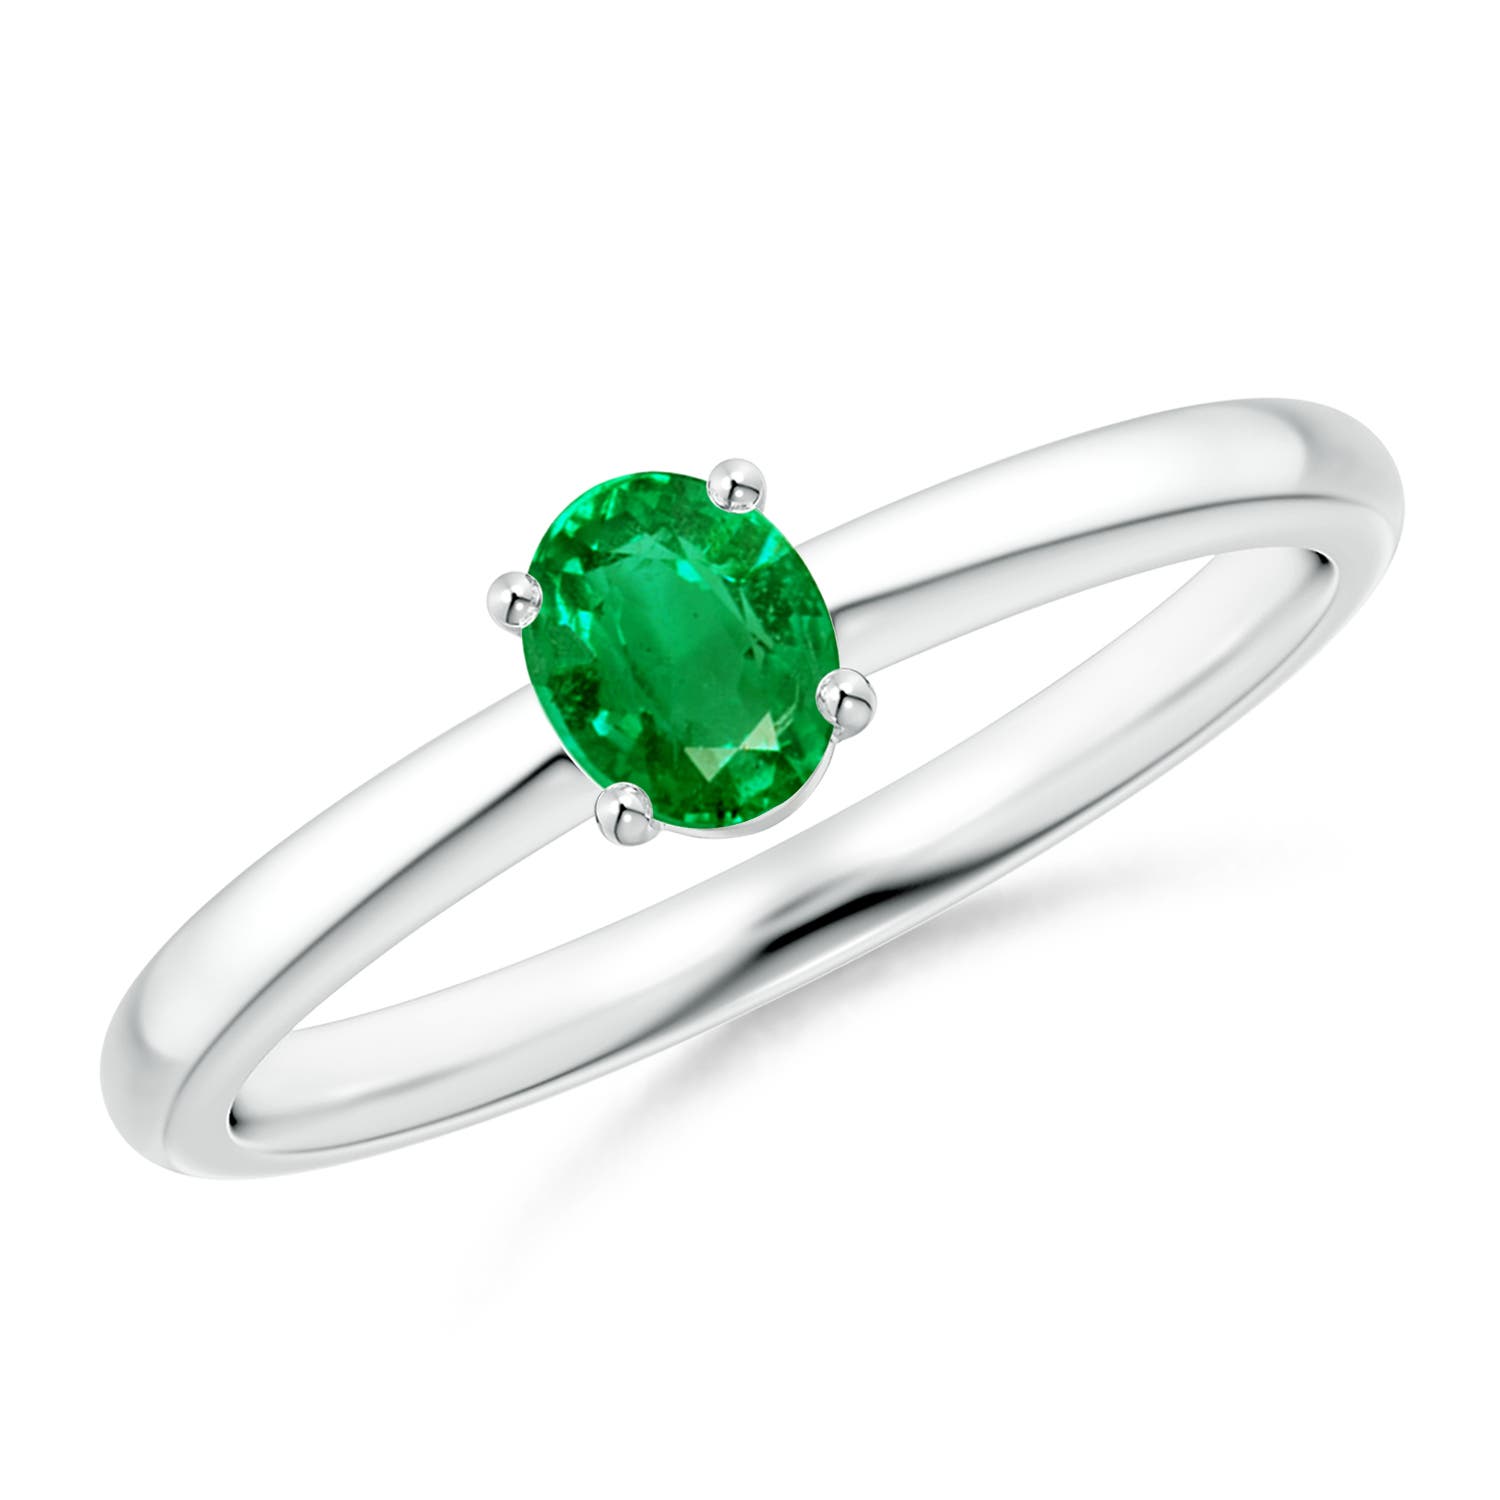 AAA - Emerald / 0.3 CT / 14 KT White Gold